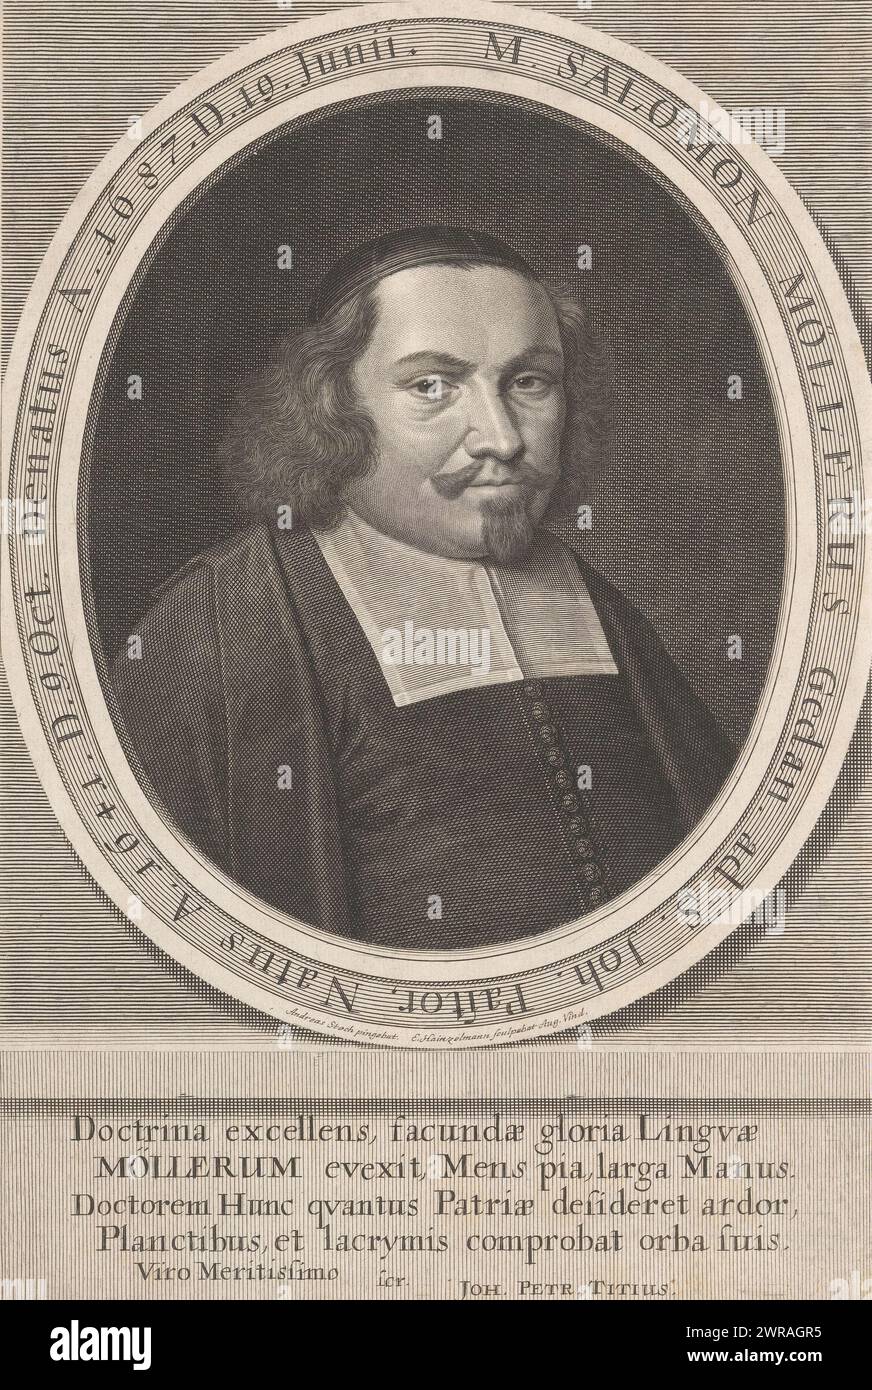 Portrait of Salomon Möller, With poem of praise in Latin., print maker: Elias Hainzelmann, after painting by: Andreas Stech, Johann Peter Titz, Augsburg, 19-Jun-1687 - 1693, paper, engraving, height 280 mm × width 187 mm, print Stock Photo